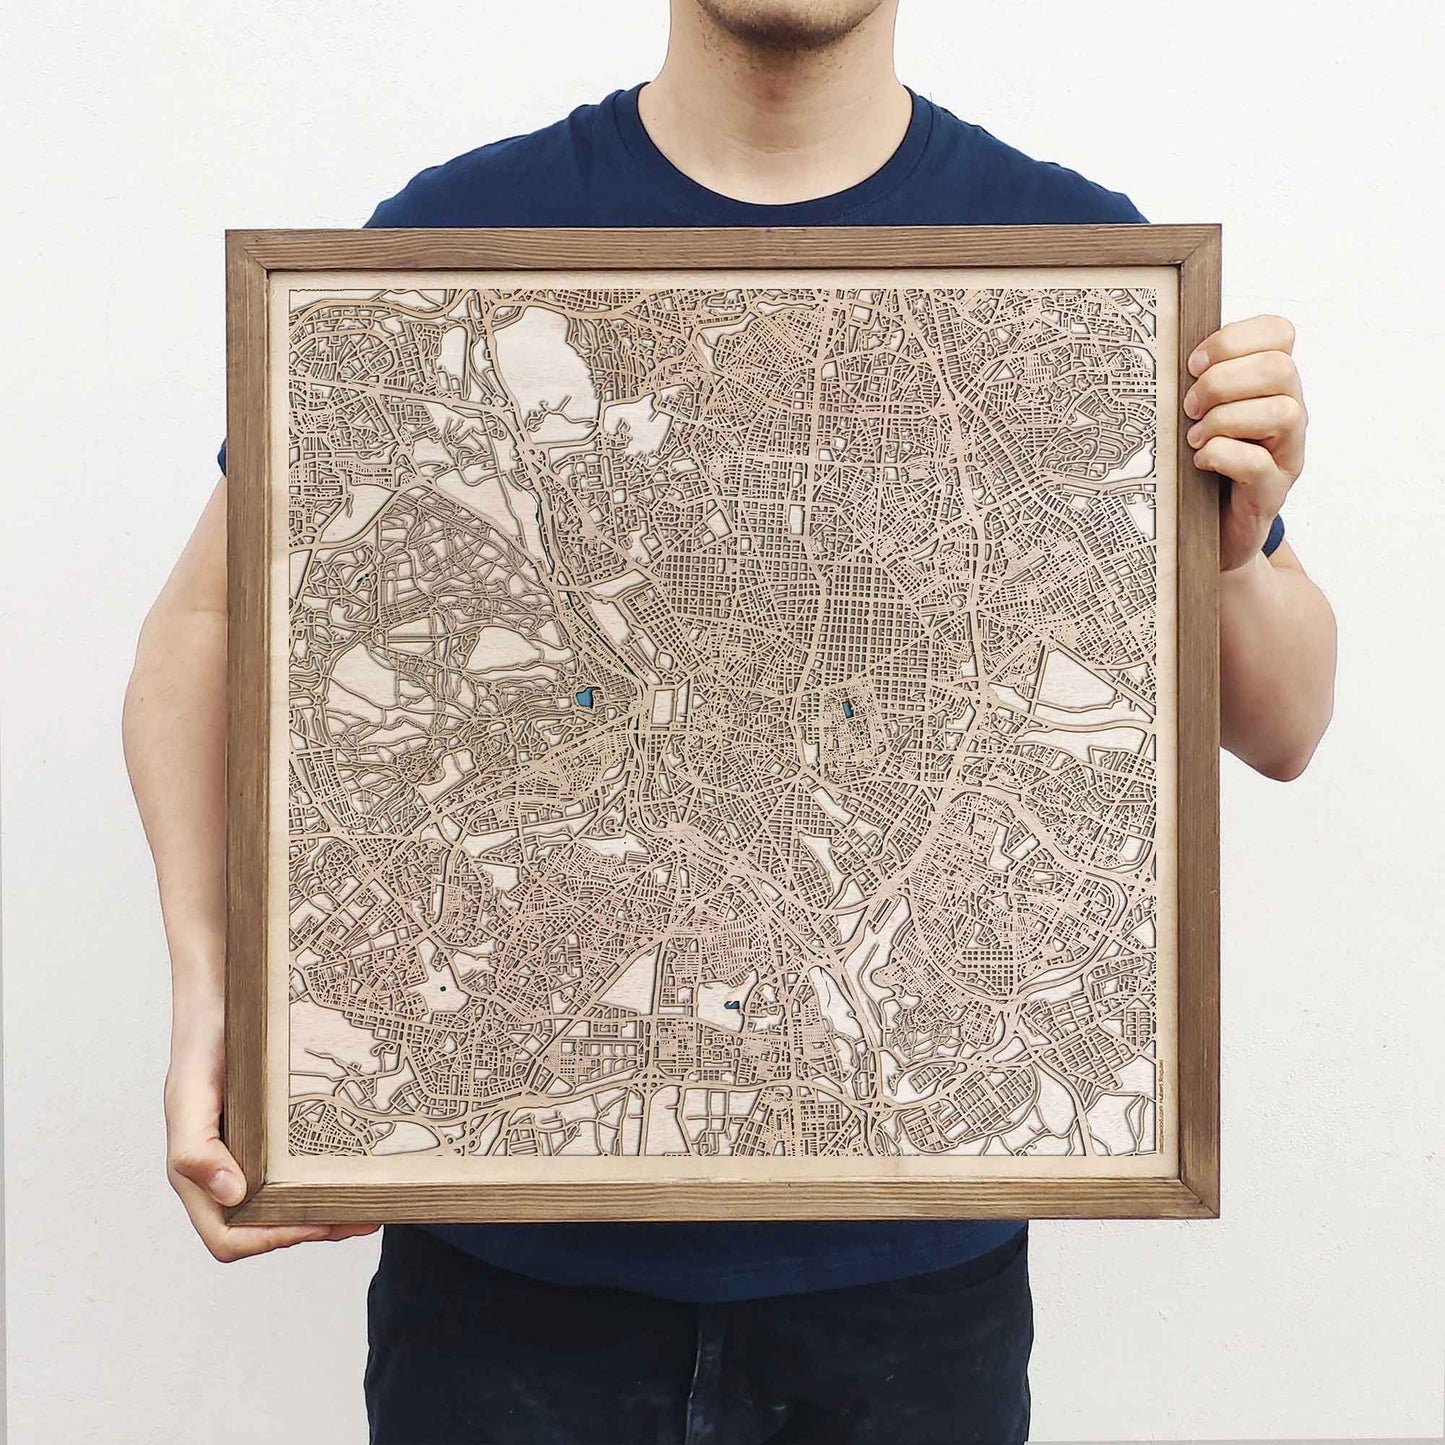 Madrid Wooden Map by CityWood - Custom Wood Map Art - Unique Laser Cut Engraved - Anniversary Gift